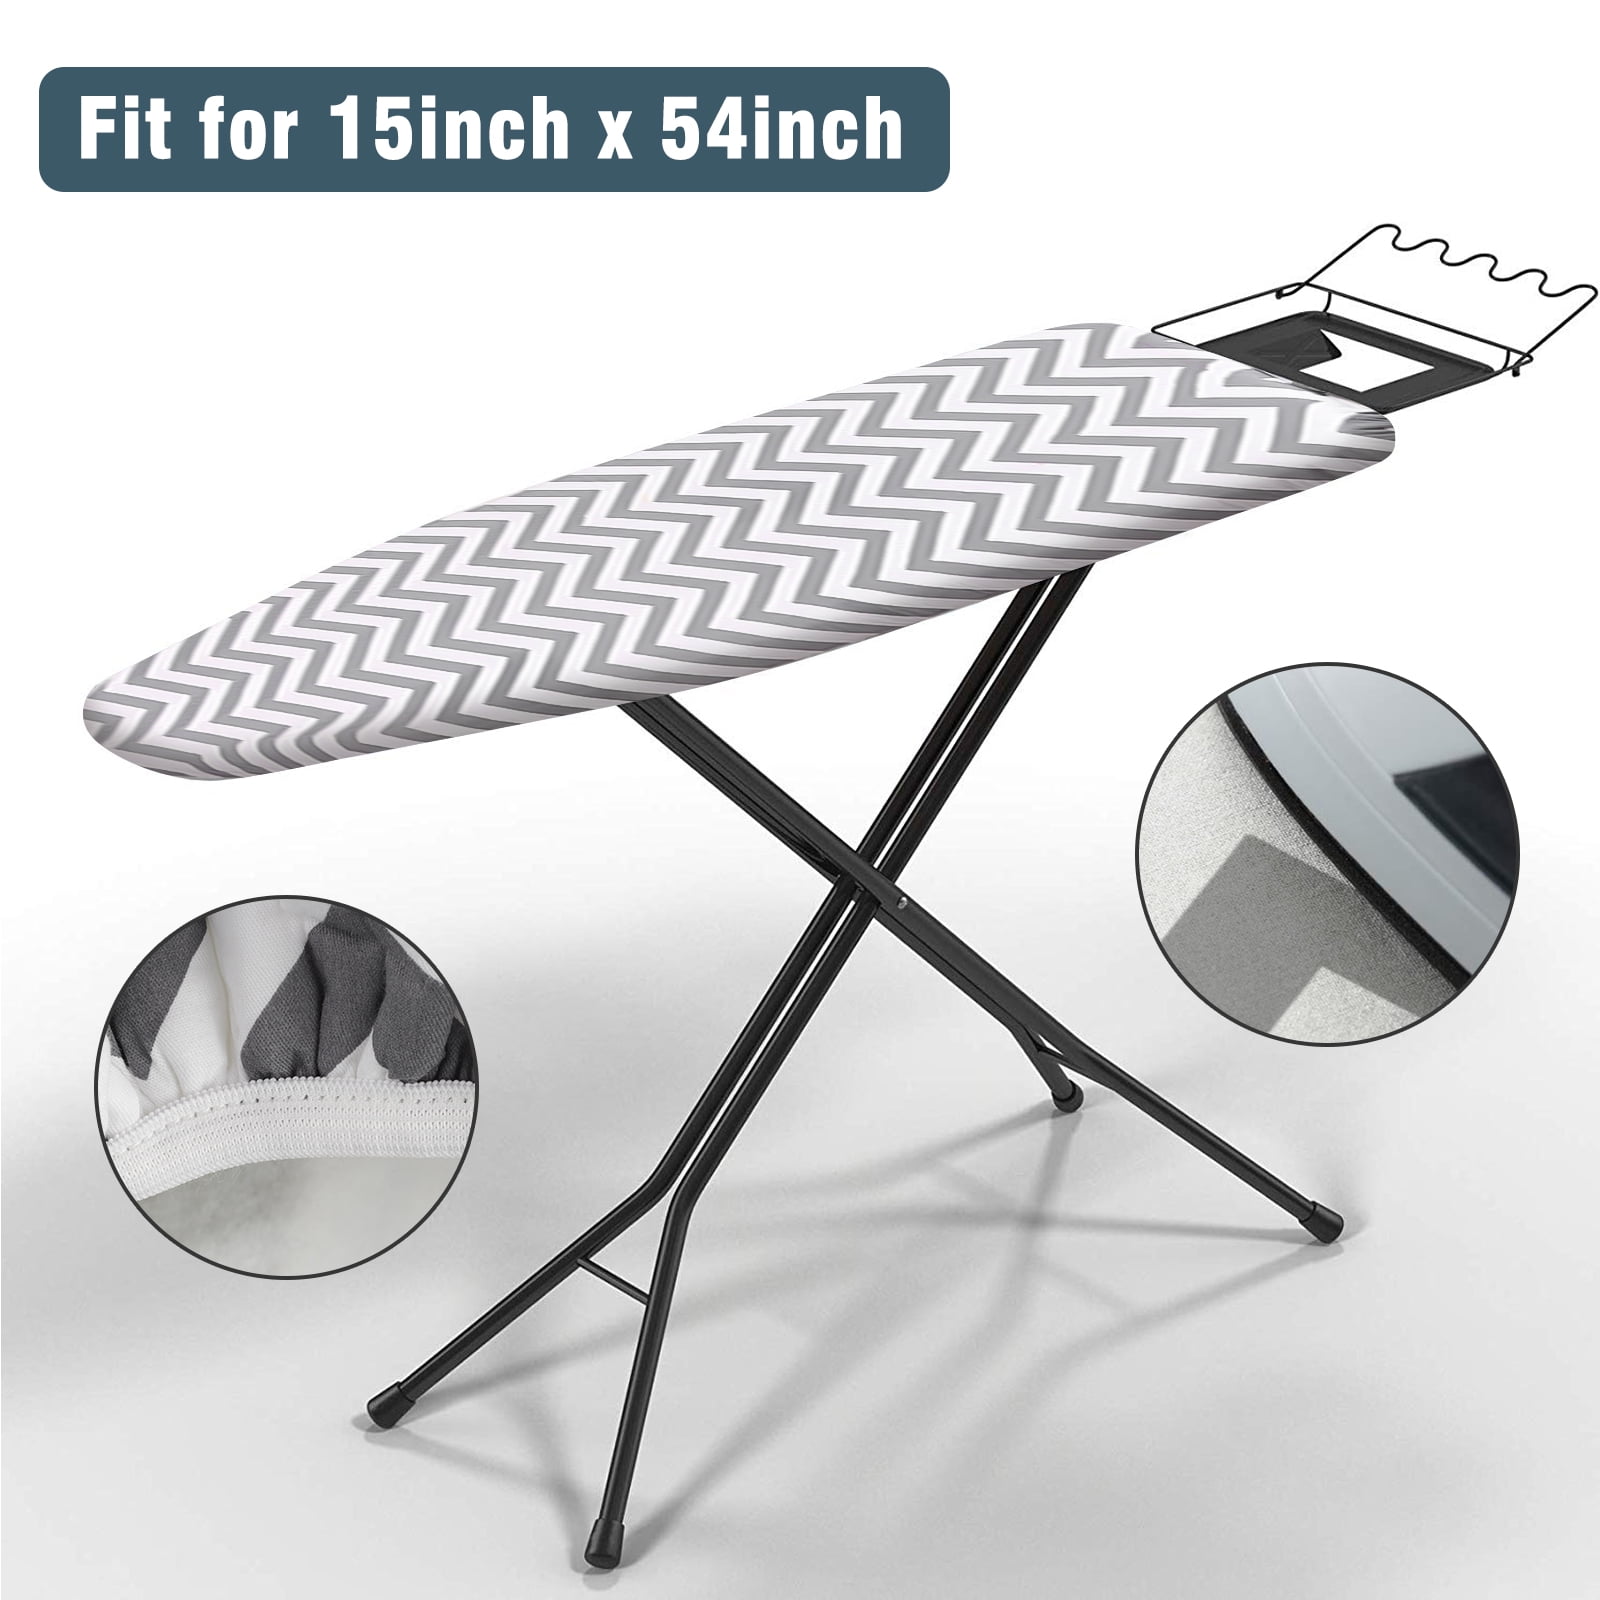 Reflective Silicone Ironing Board Cover with Straps Elastic Edge Thick Padding Fits Large Ironing Board Scorch and Stain Resistant,Blue Refrze Wide Ironing Board Cover and Pad 18x49in